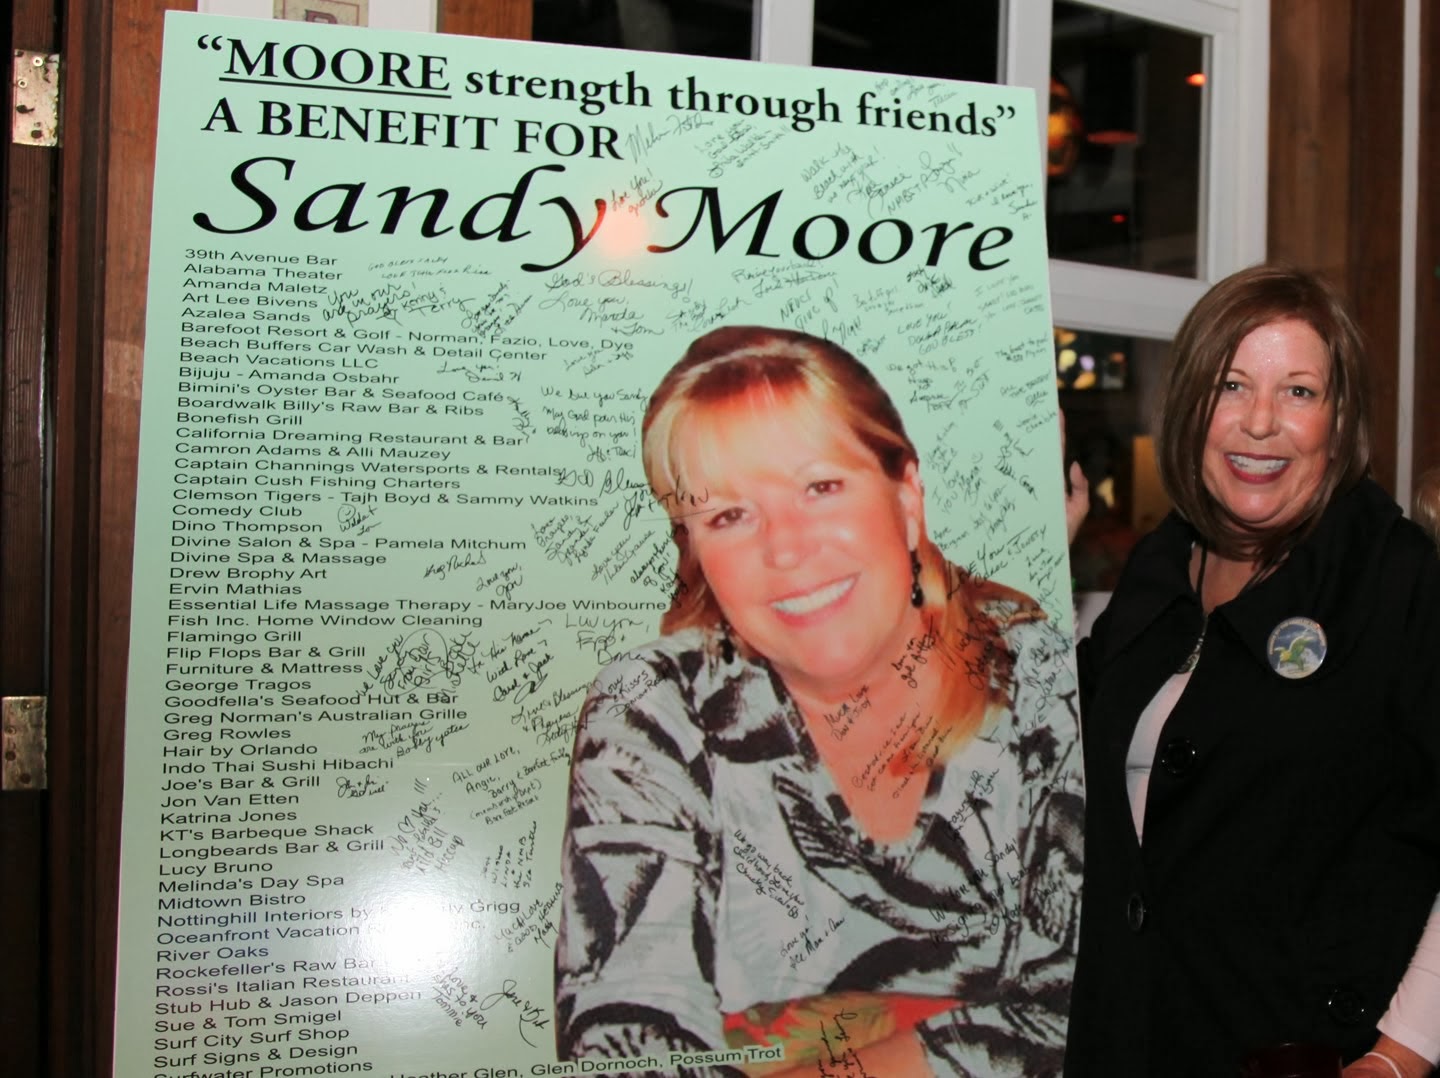 2014 Sea Turtle Nesting Season Dedicated to Sandy Moore and her fight to regain her health